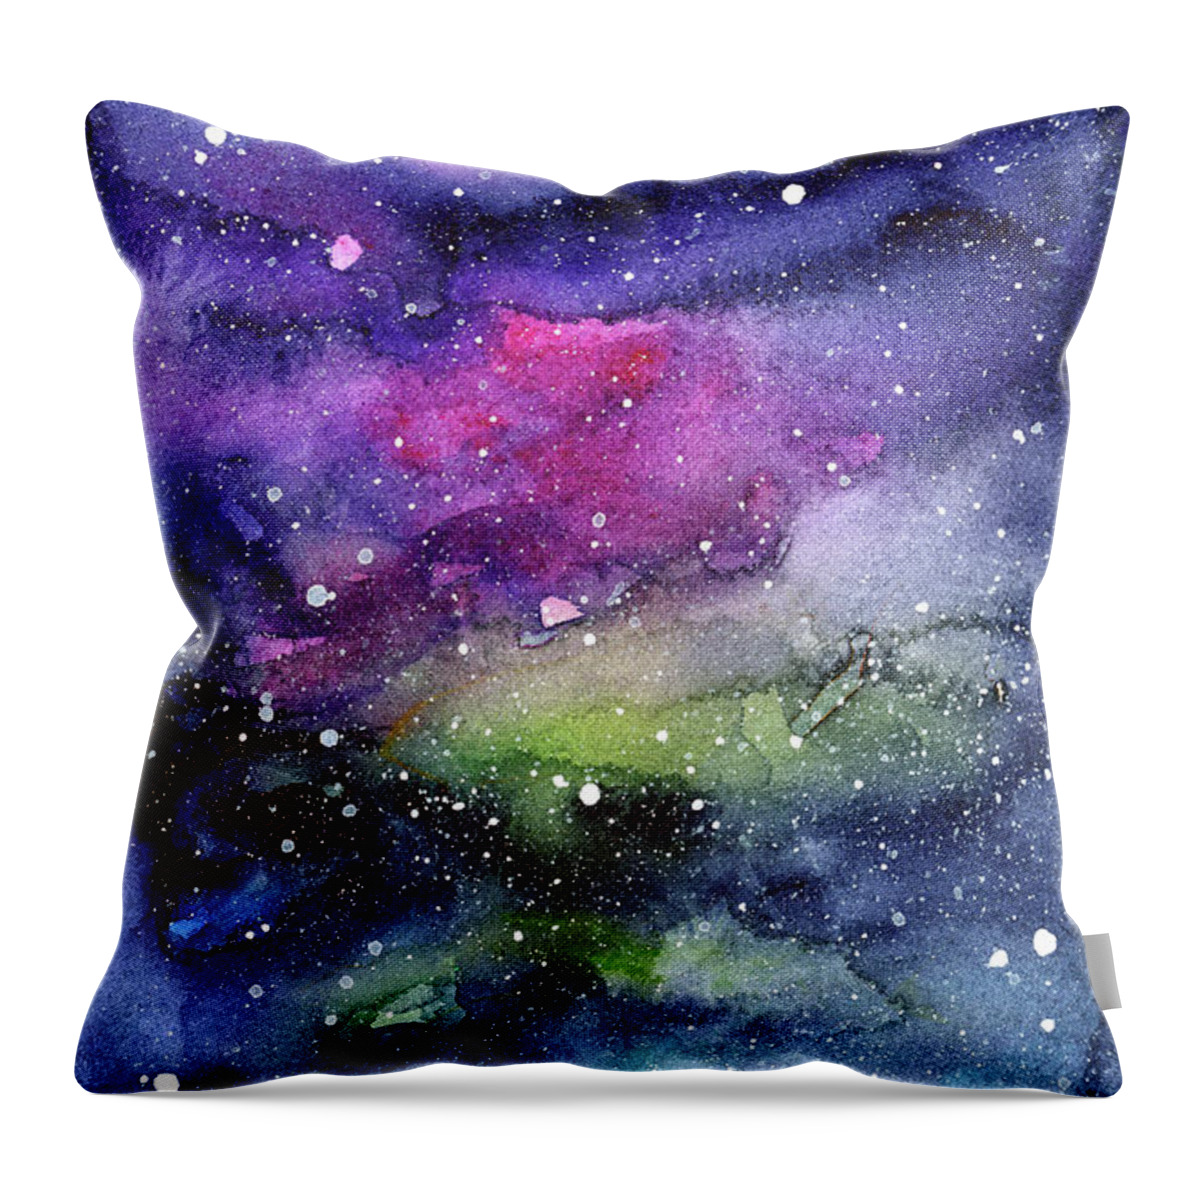 Nebula Throw Pillow featuring the painting Rainbow Galaxy Watercolor by Olga Shvartsur